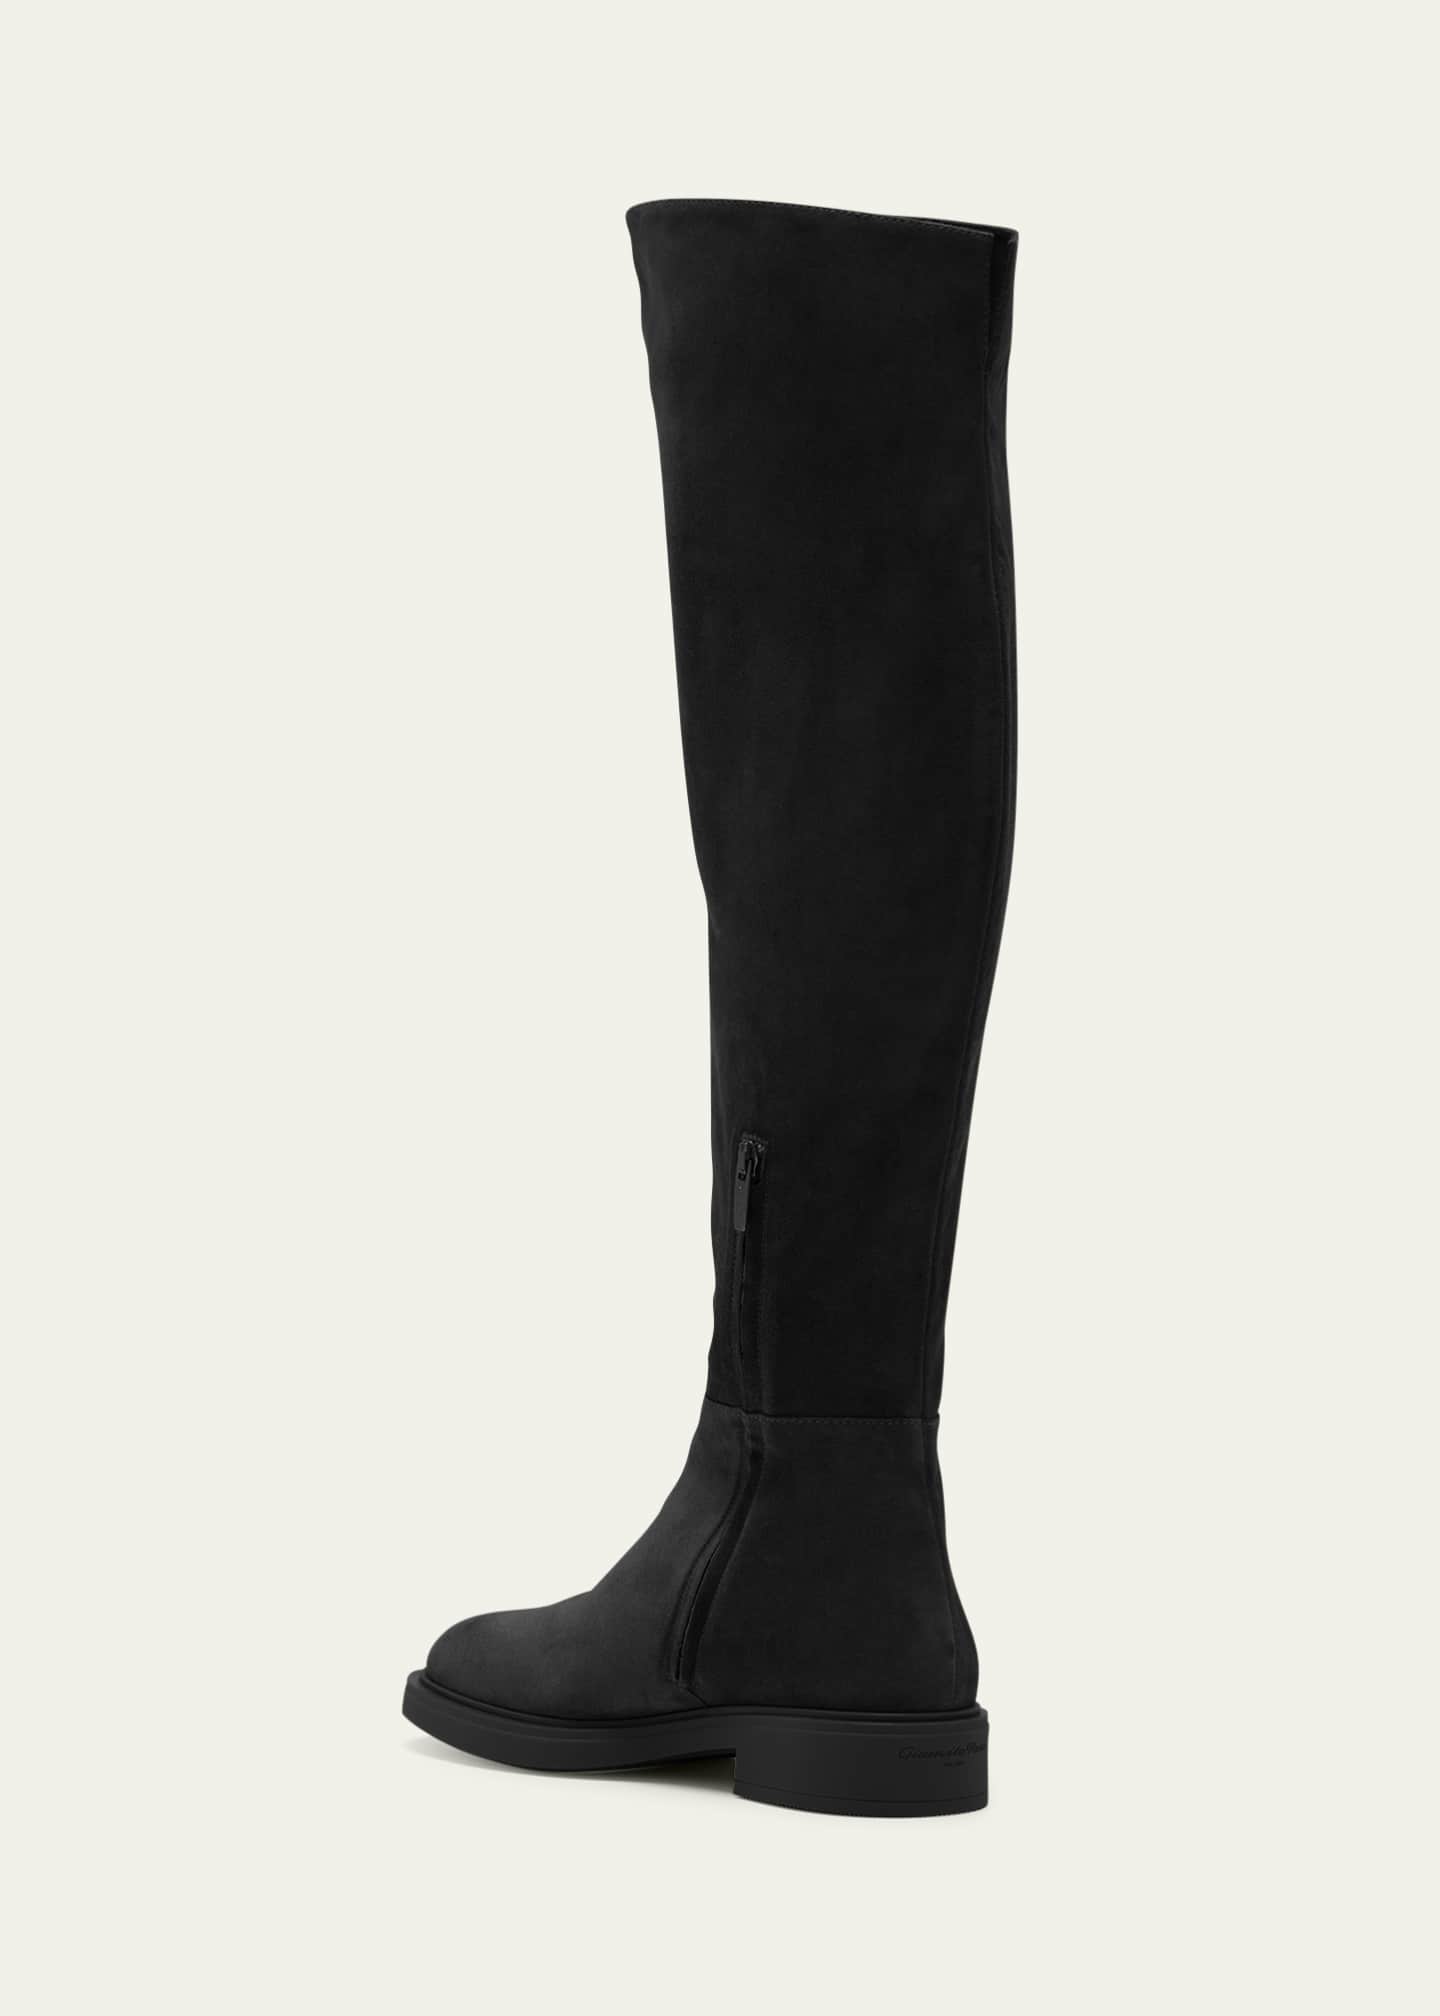 Gianvito Rossi Suede Over-The-Knee Boots - Bergdorf Goodman